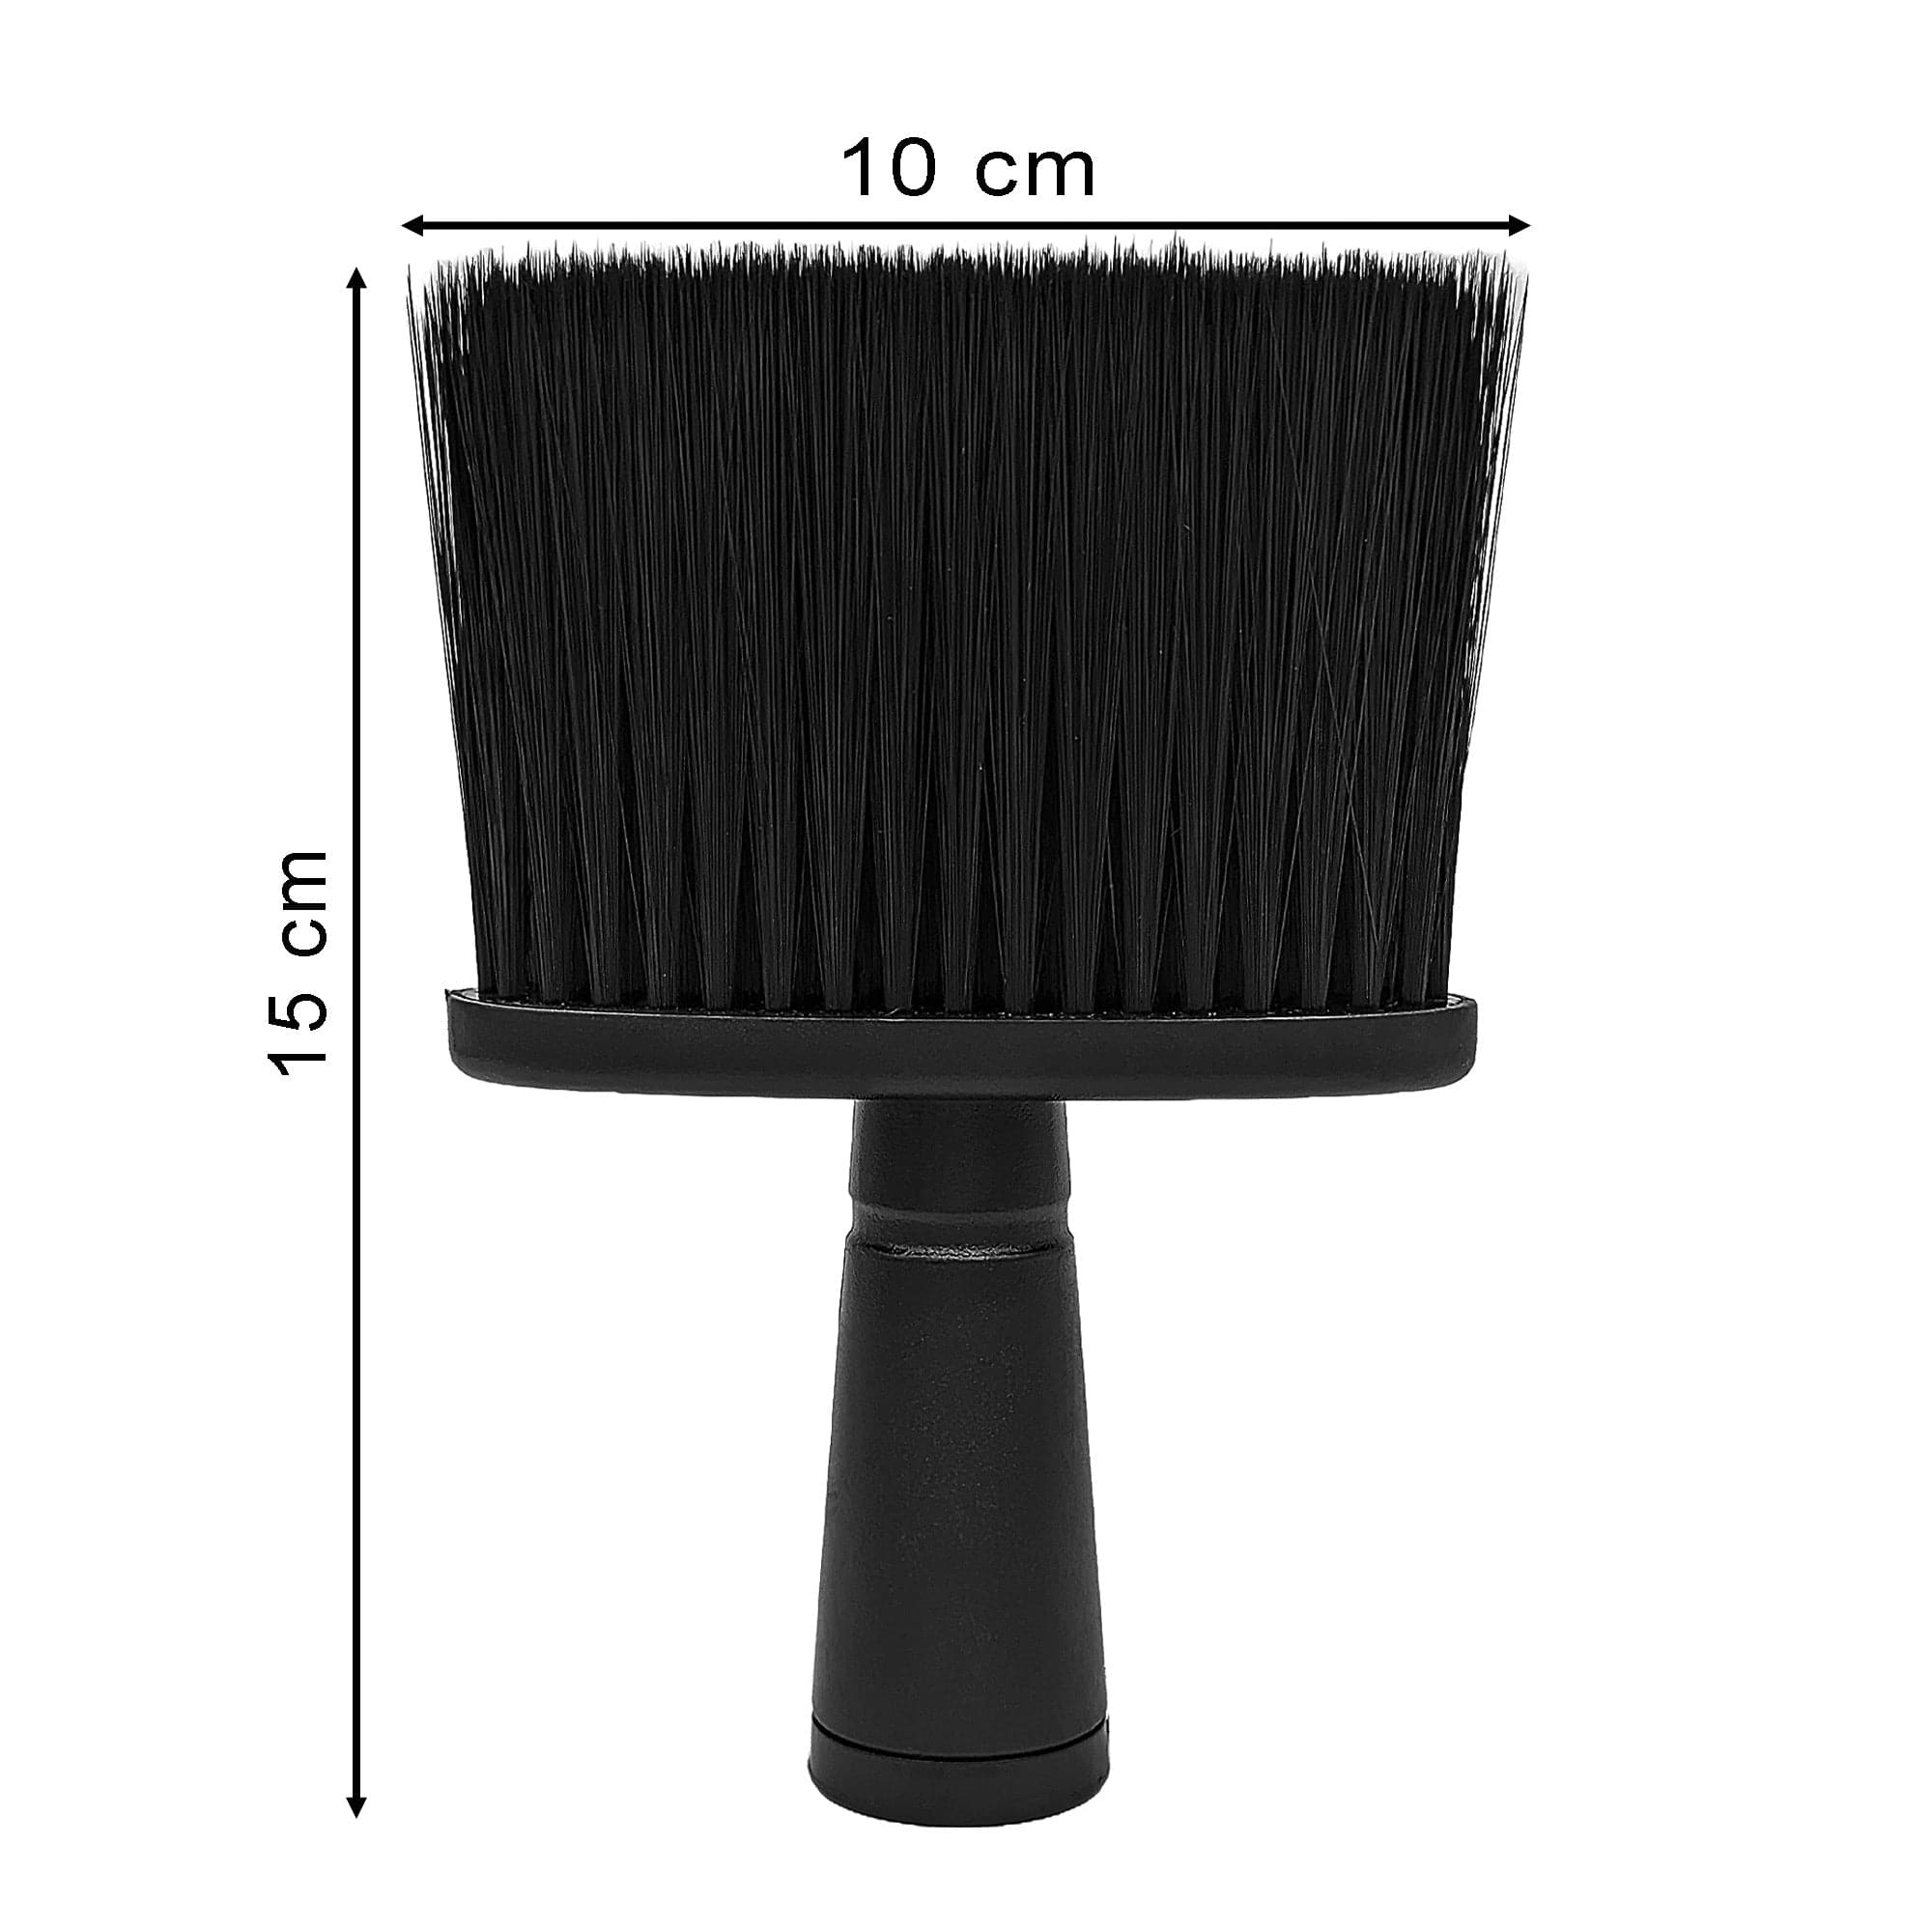 Eson - Neck Duster Brush Ultra-Soft Comfort During Use  15x10cm (Black)